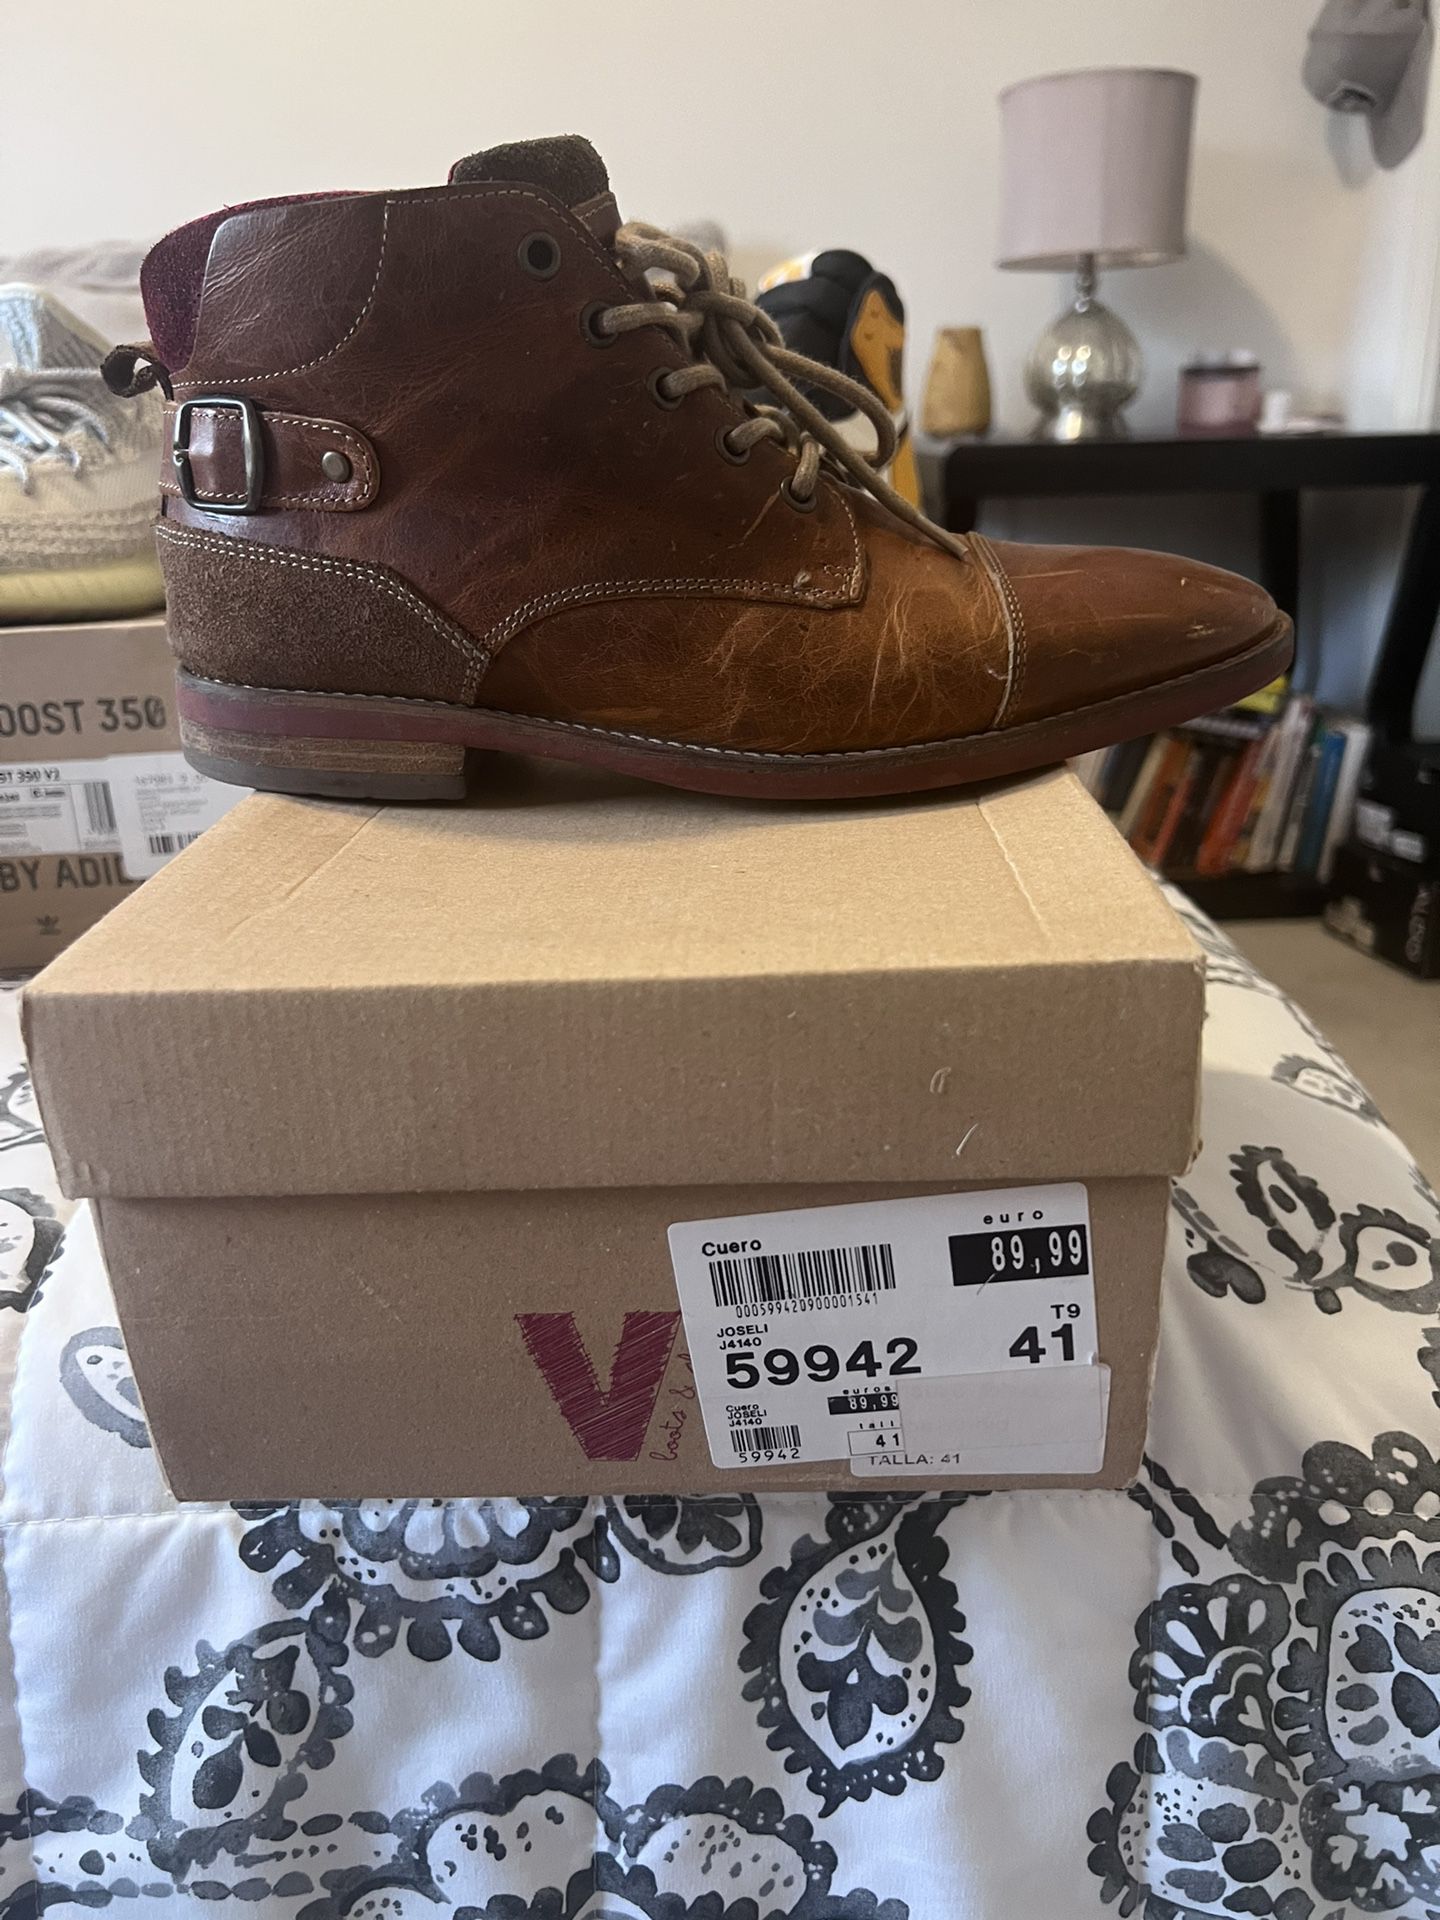 Botas/Boots Leather (zapatos Men for Union City, CA - OfferUp